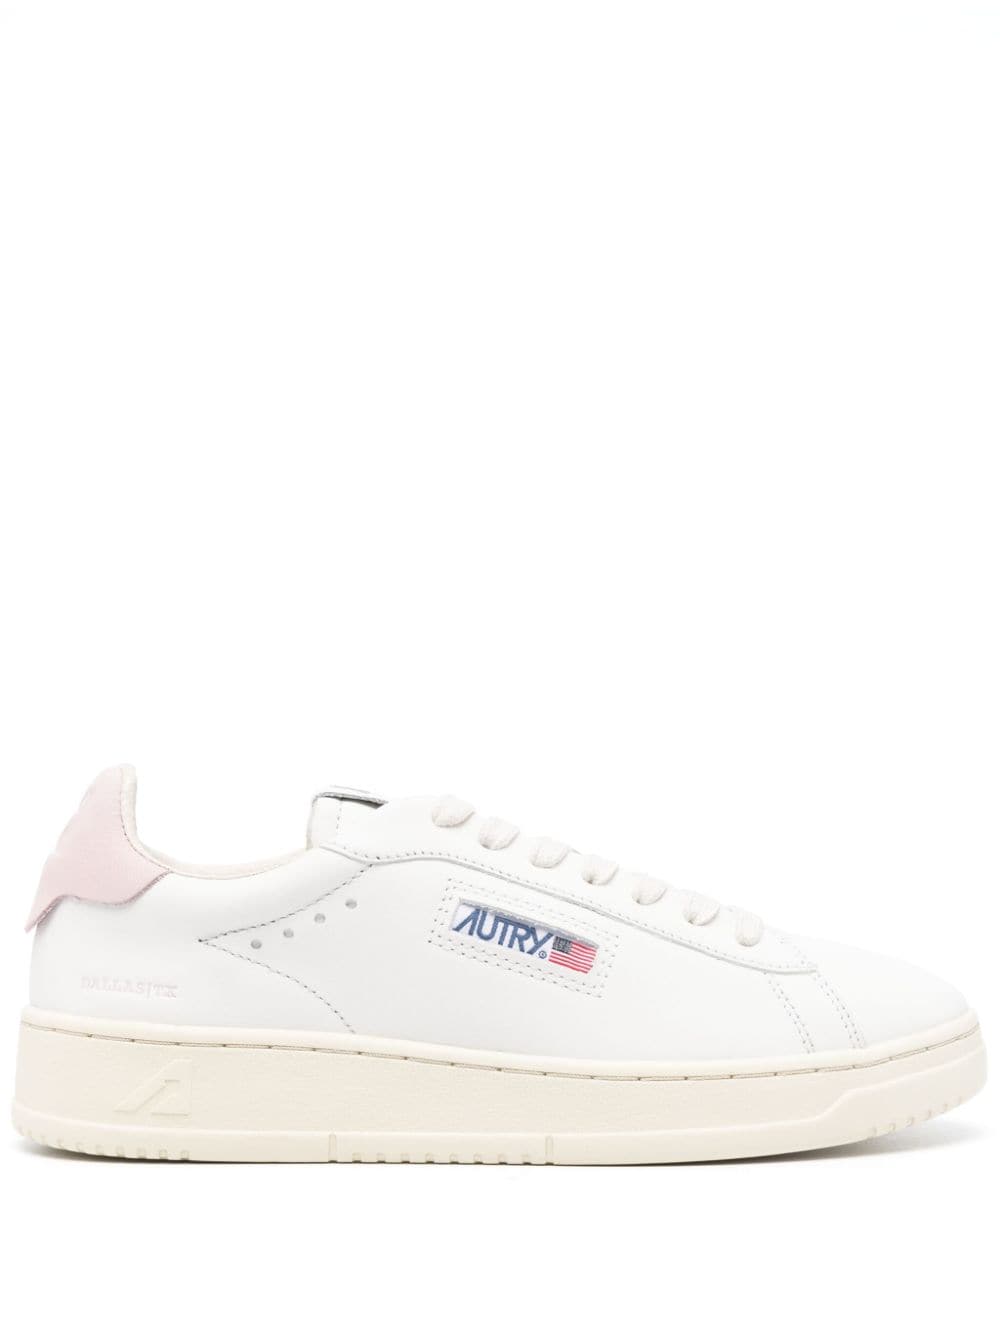 Autry Dallas Leather Sneakers In White